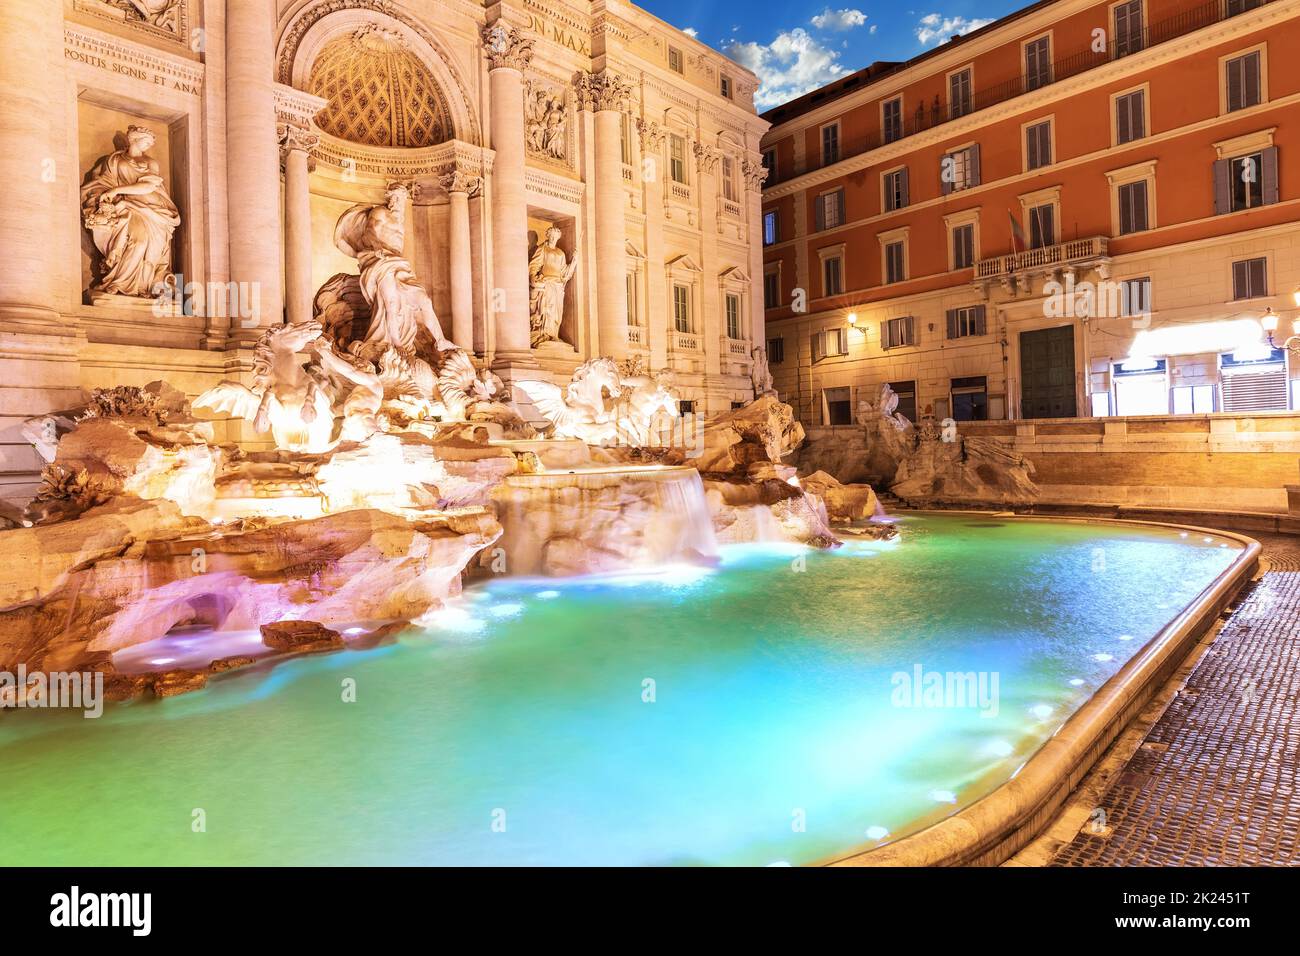 Trevi Fountain and its beautiful statues at sunrise, Rome, Italy. Stock Photo